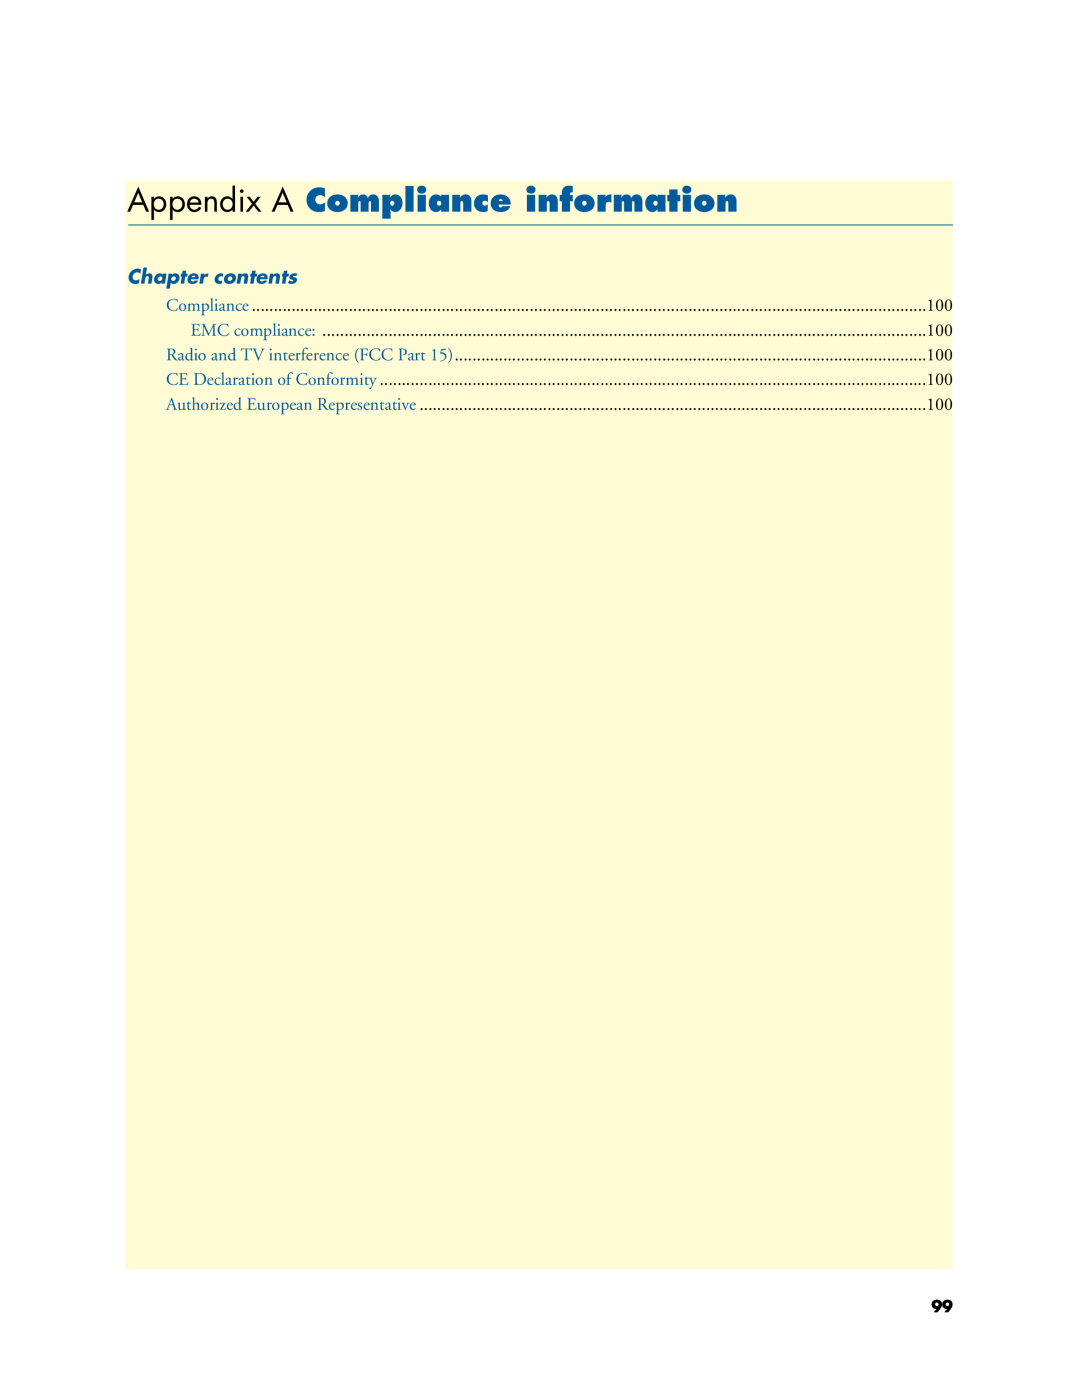 Patton electronic 3202 manual Appendix A Compliance information, Chapter contents 